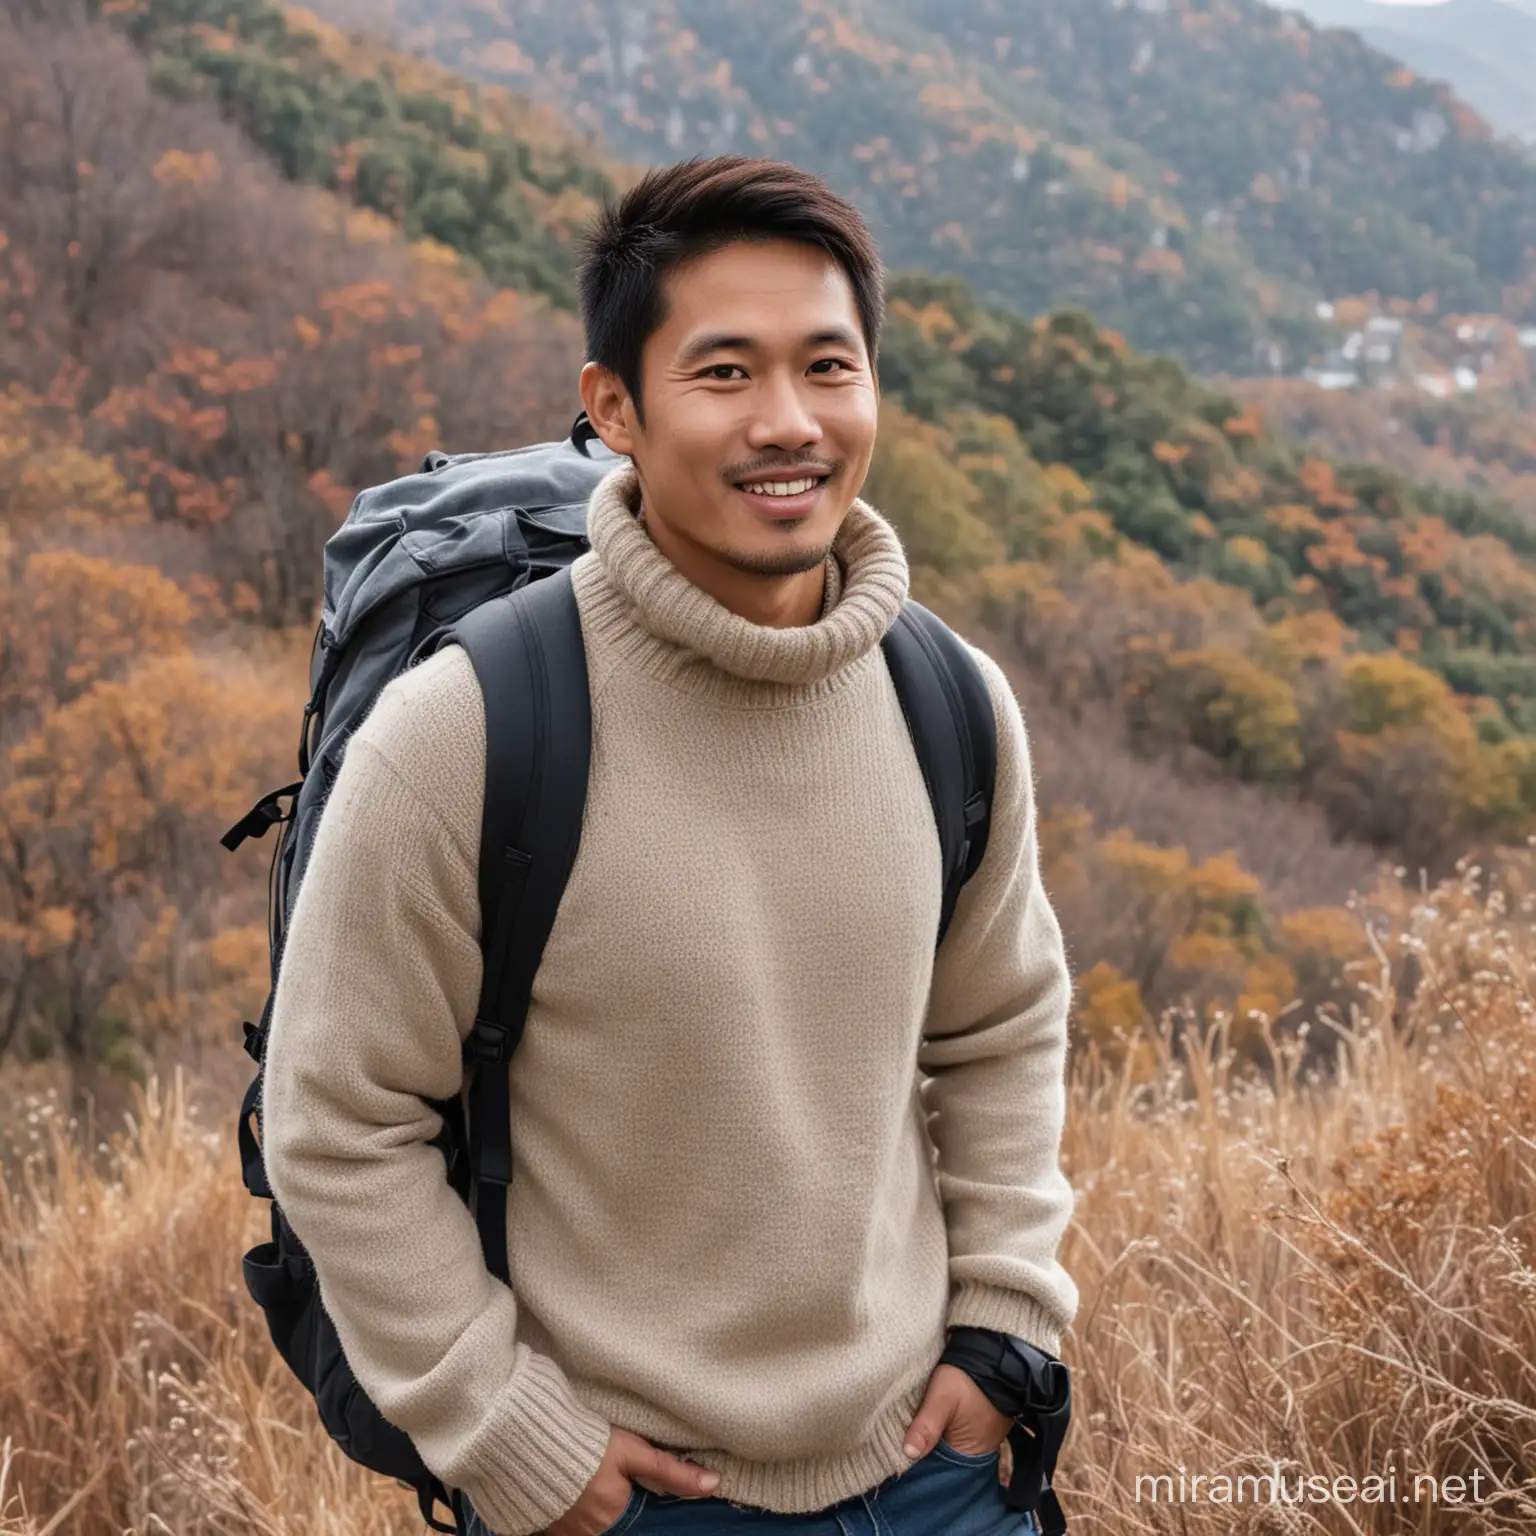 A 33 year old Asian young man, standing on a mountain hill, wearing a sweater, jeans, backpack, gloves, high cliff, lots of trees, faint smile, posing